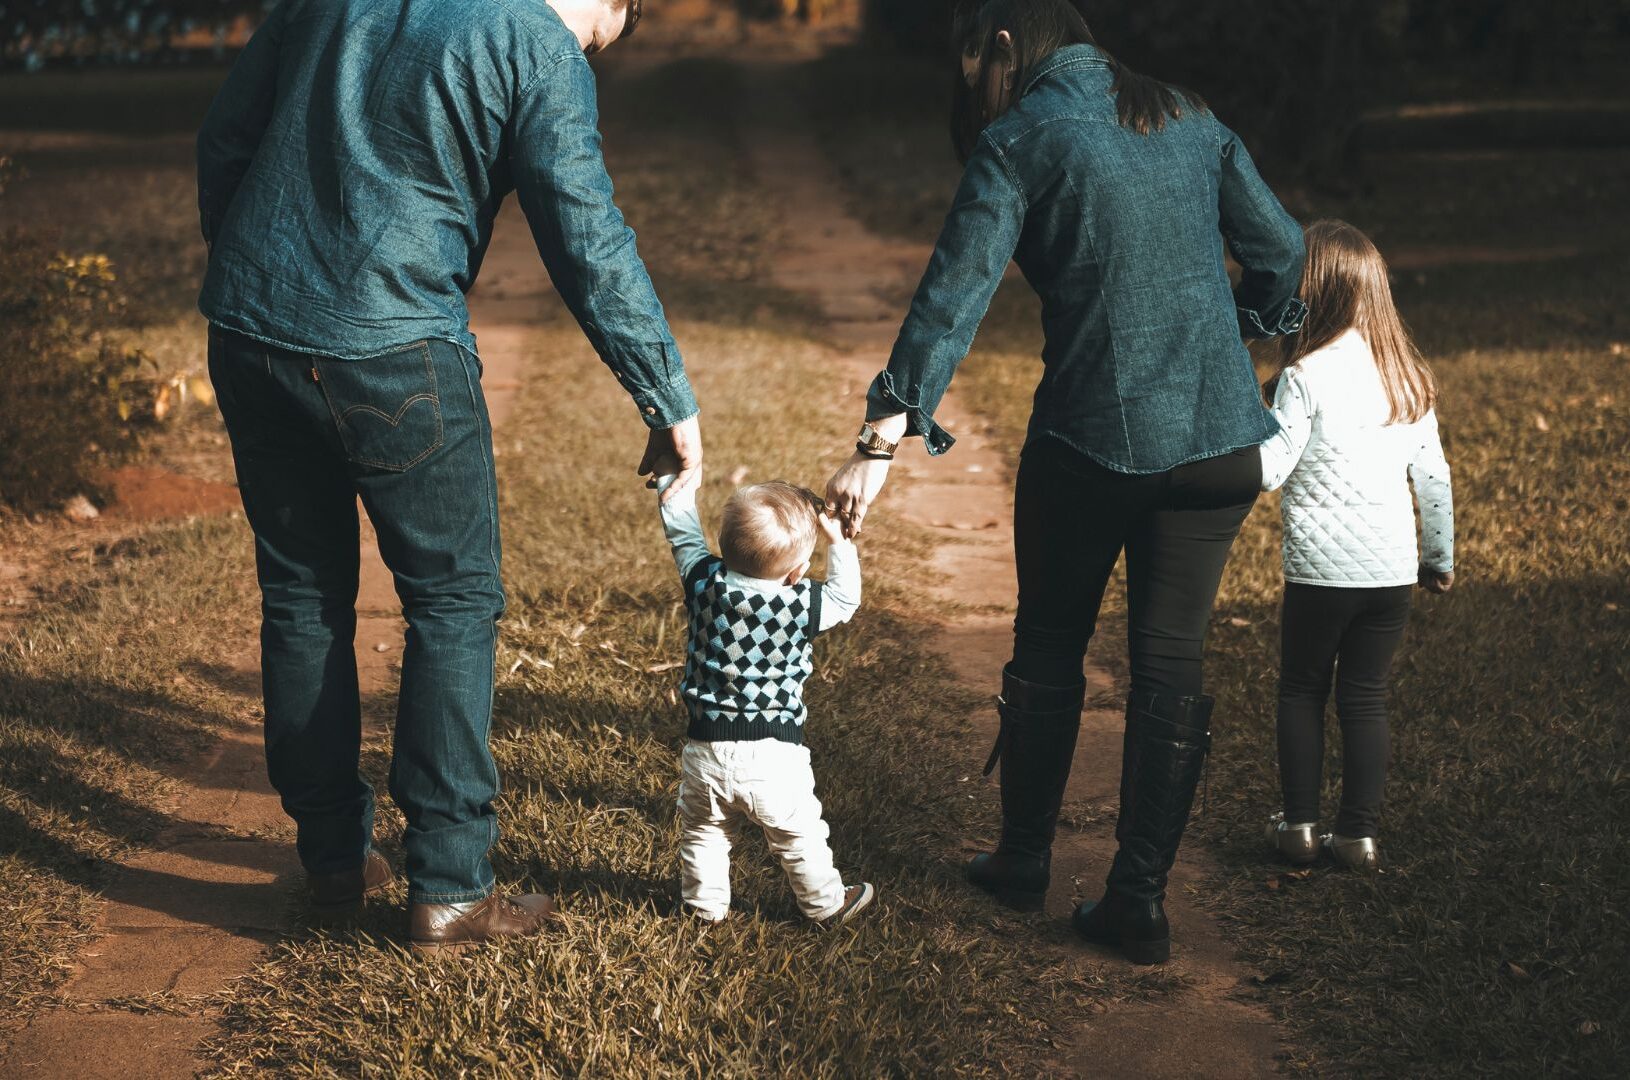 Adding a new child to the family image credit Vidal Balielo Jr from Pexels aspect ratio